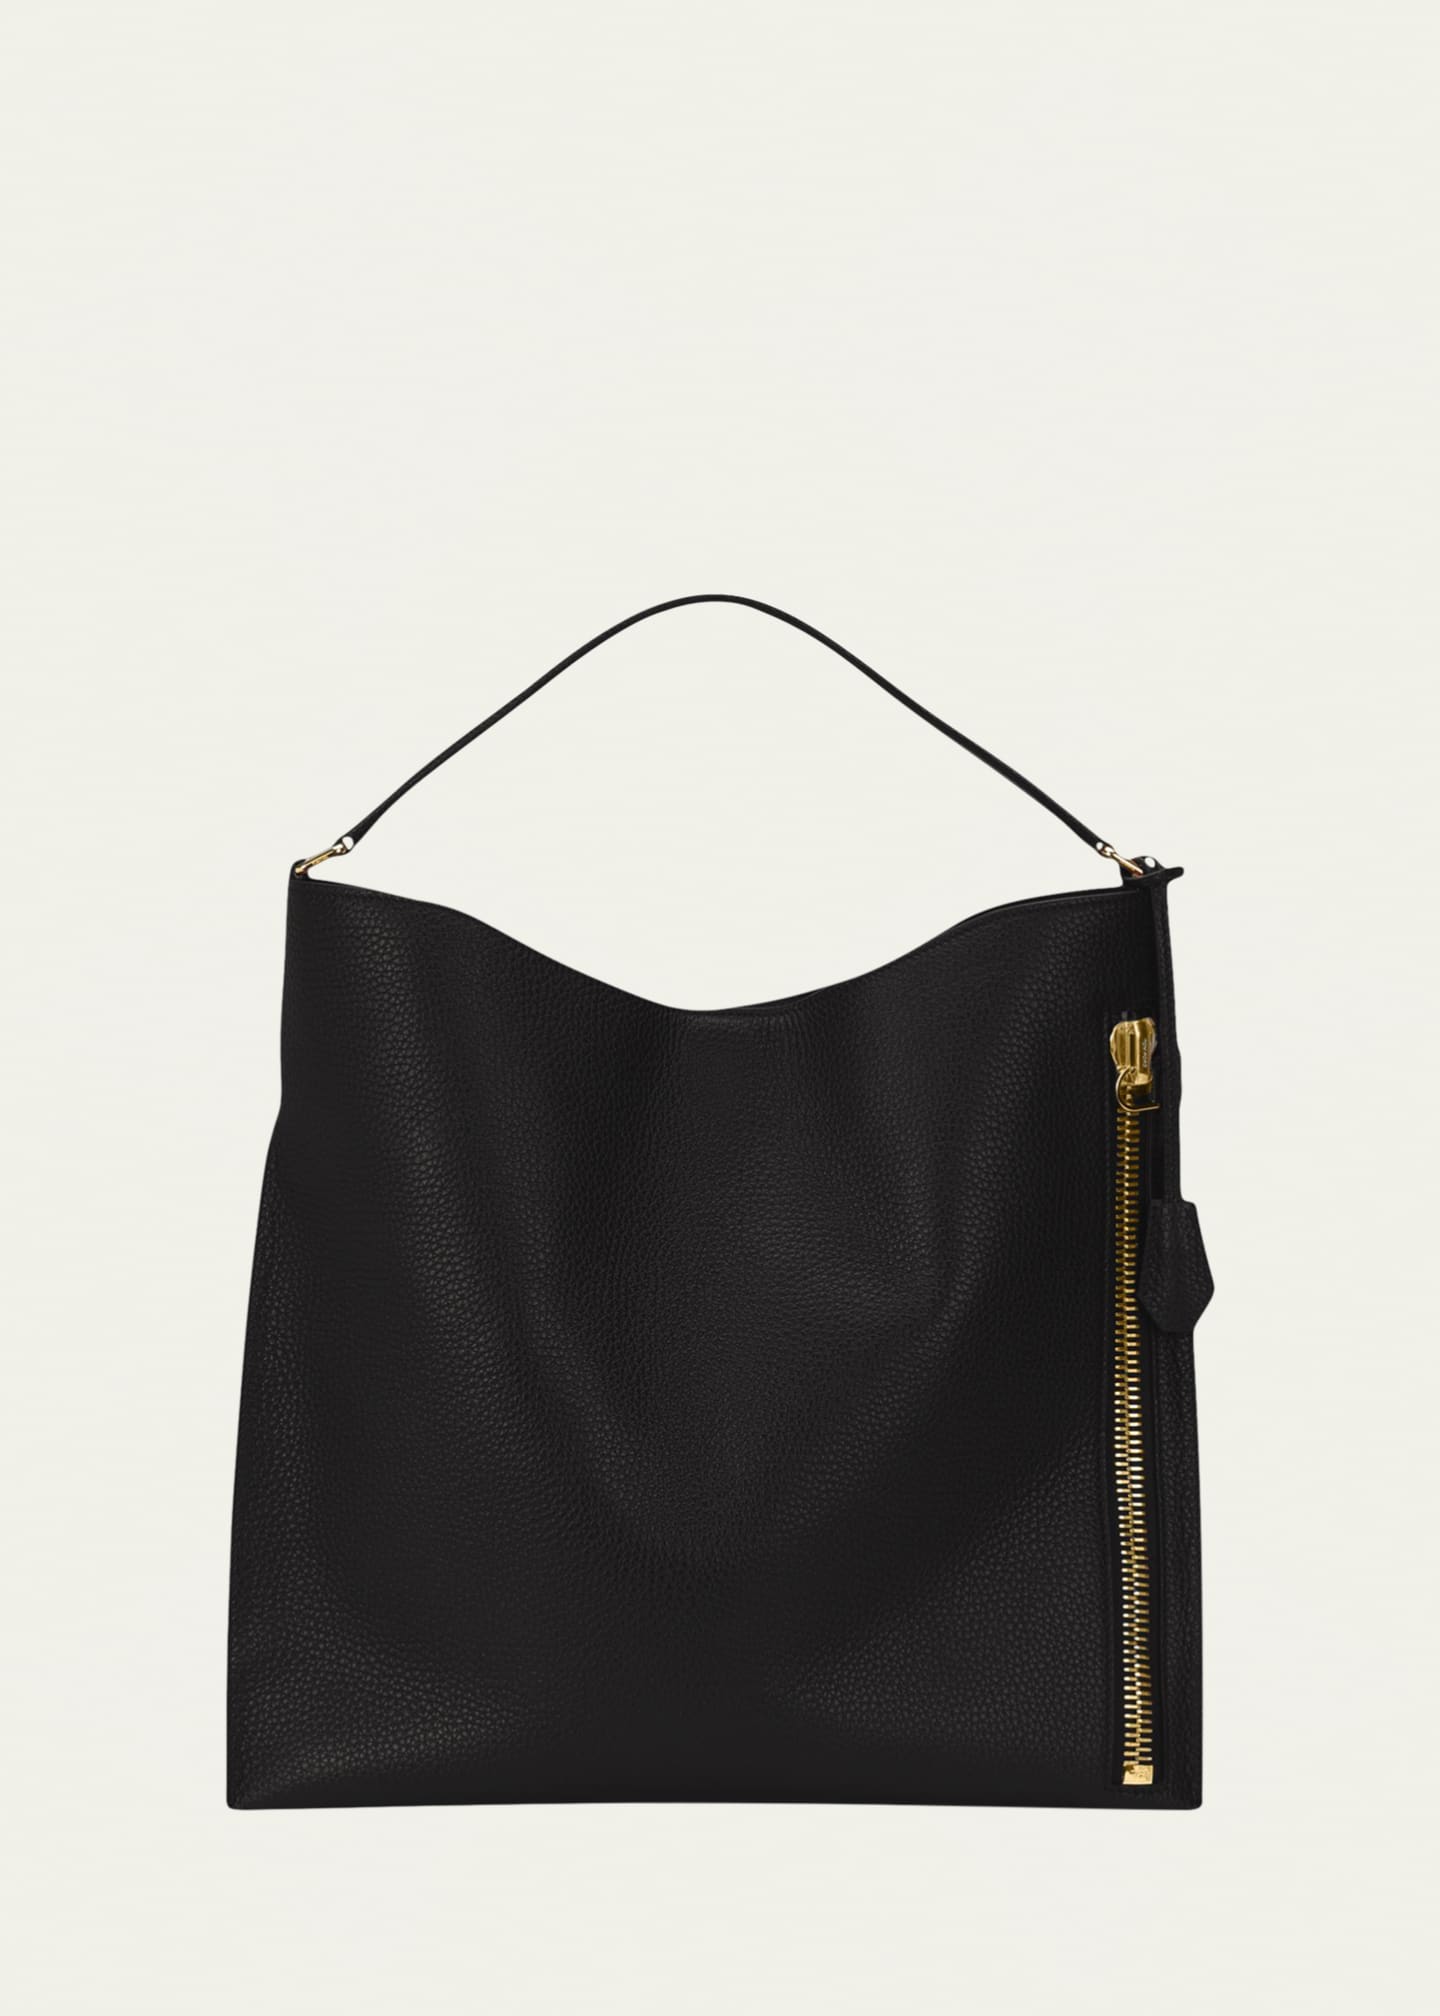 TOM FORD Alix Hobo Small in Grained Leather Image 1 of 5